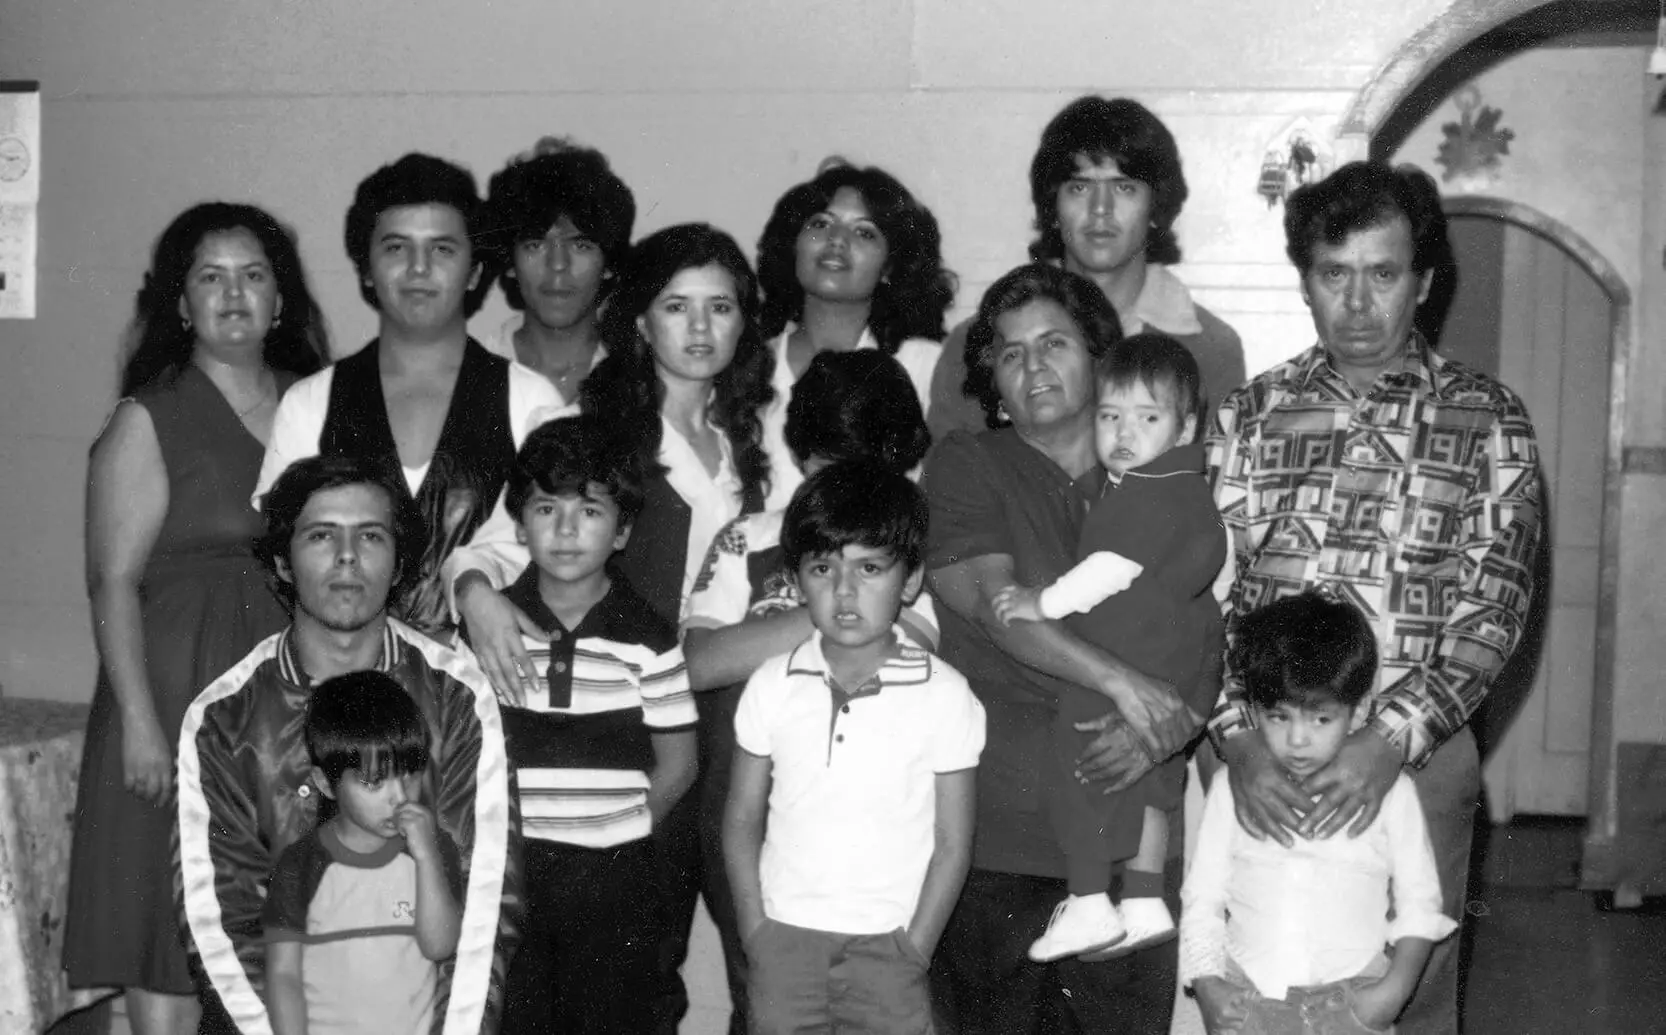 Black and white family portrait featuring 15 individuals. The photo was taken around 1980.